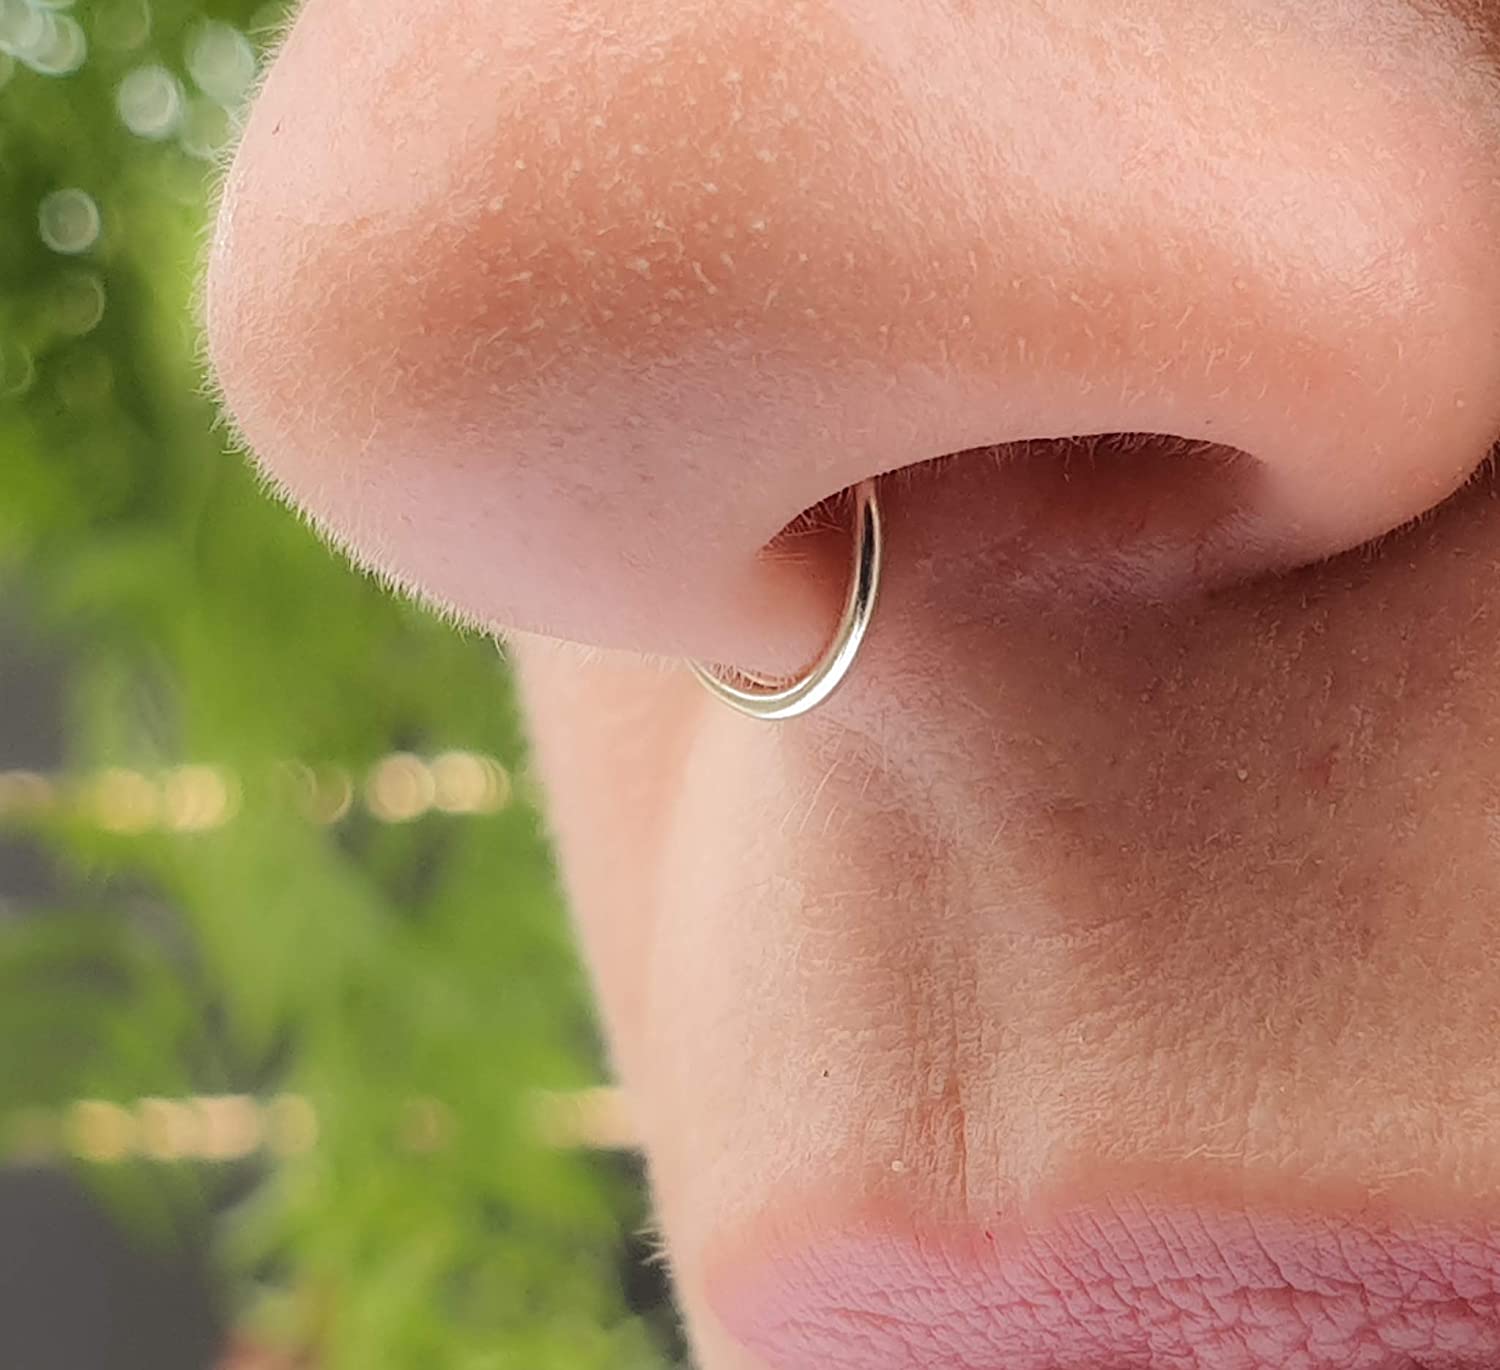 Amazon.com: Tiny Silver Nose Ring hoop - 24 gauge snug Nose Hoop thin nose  Piercings hoops - nose piercing rings : Handmade Products